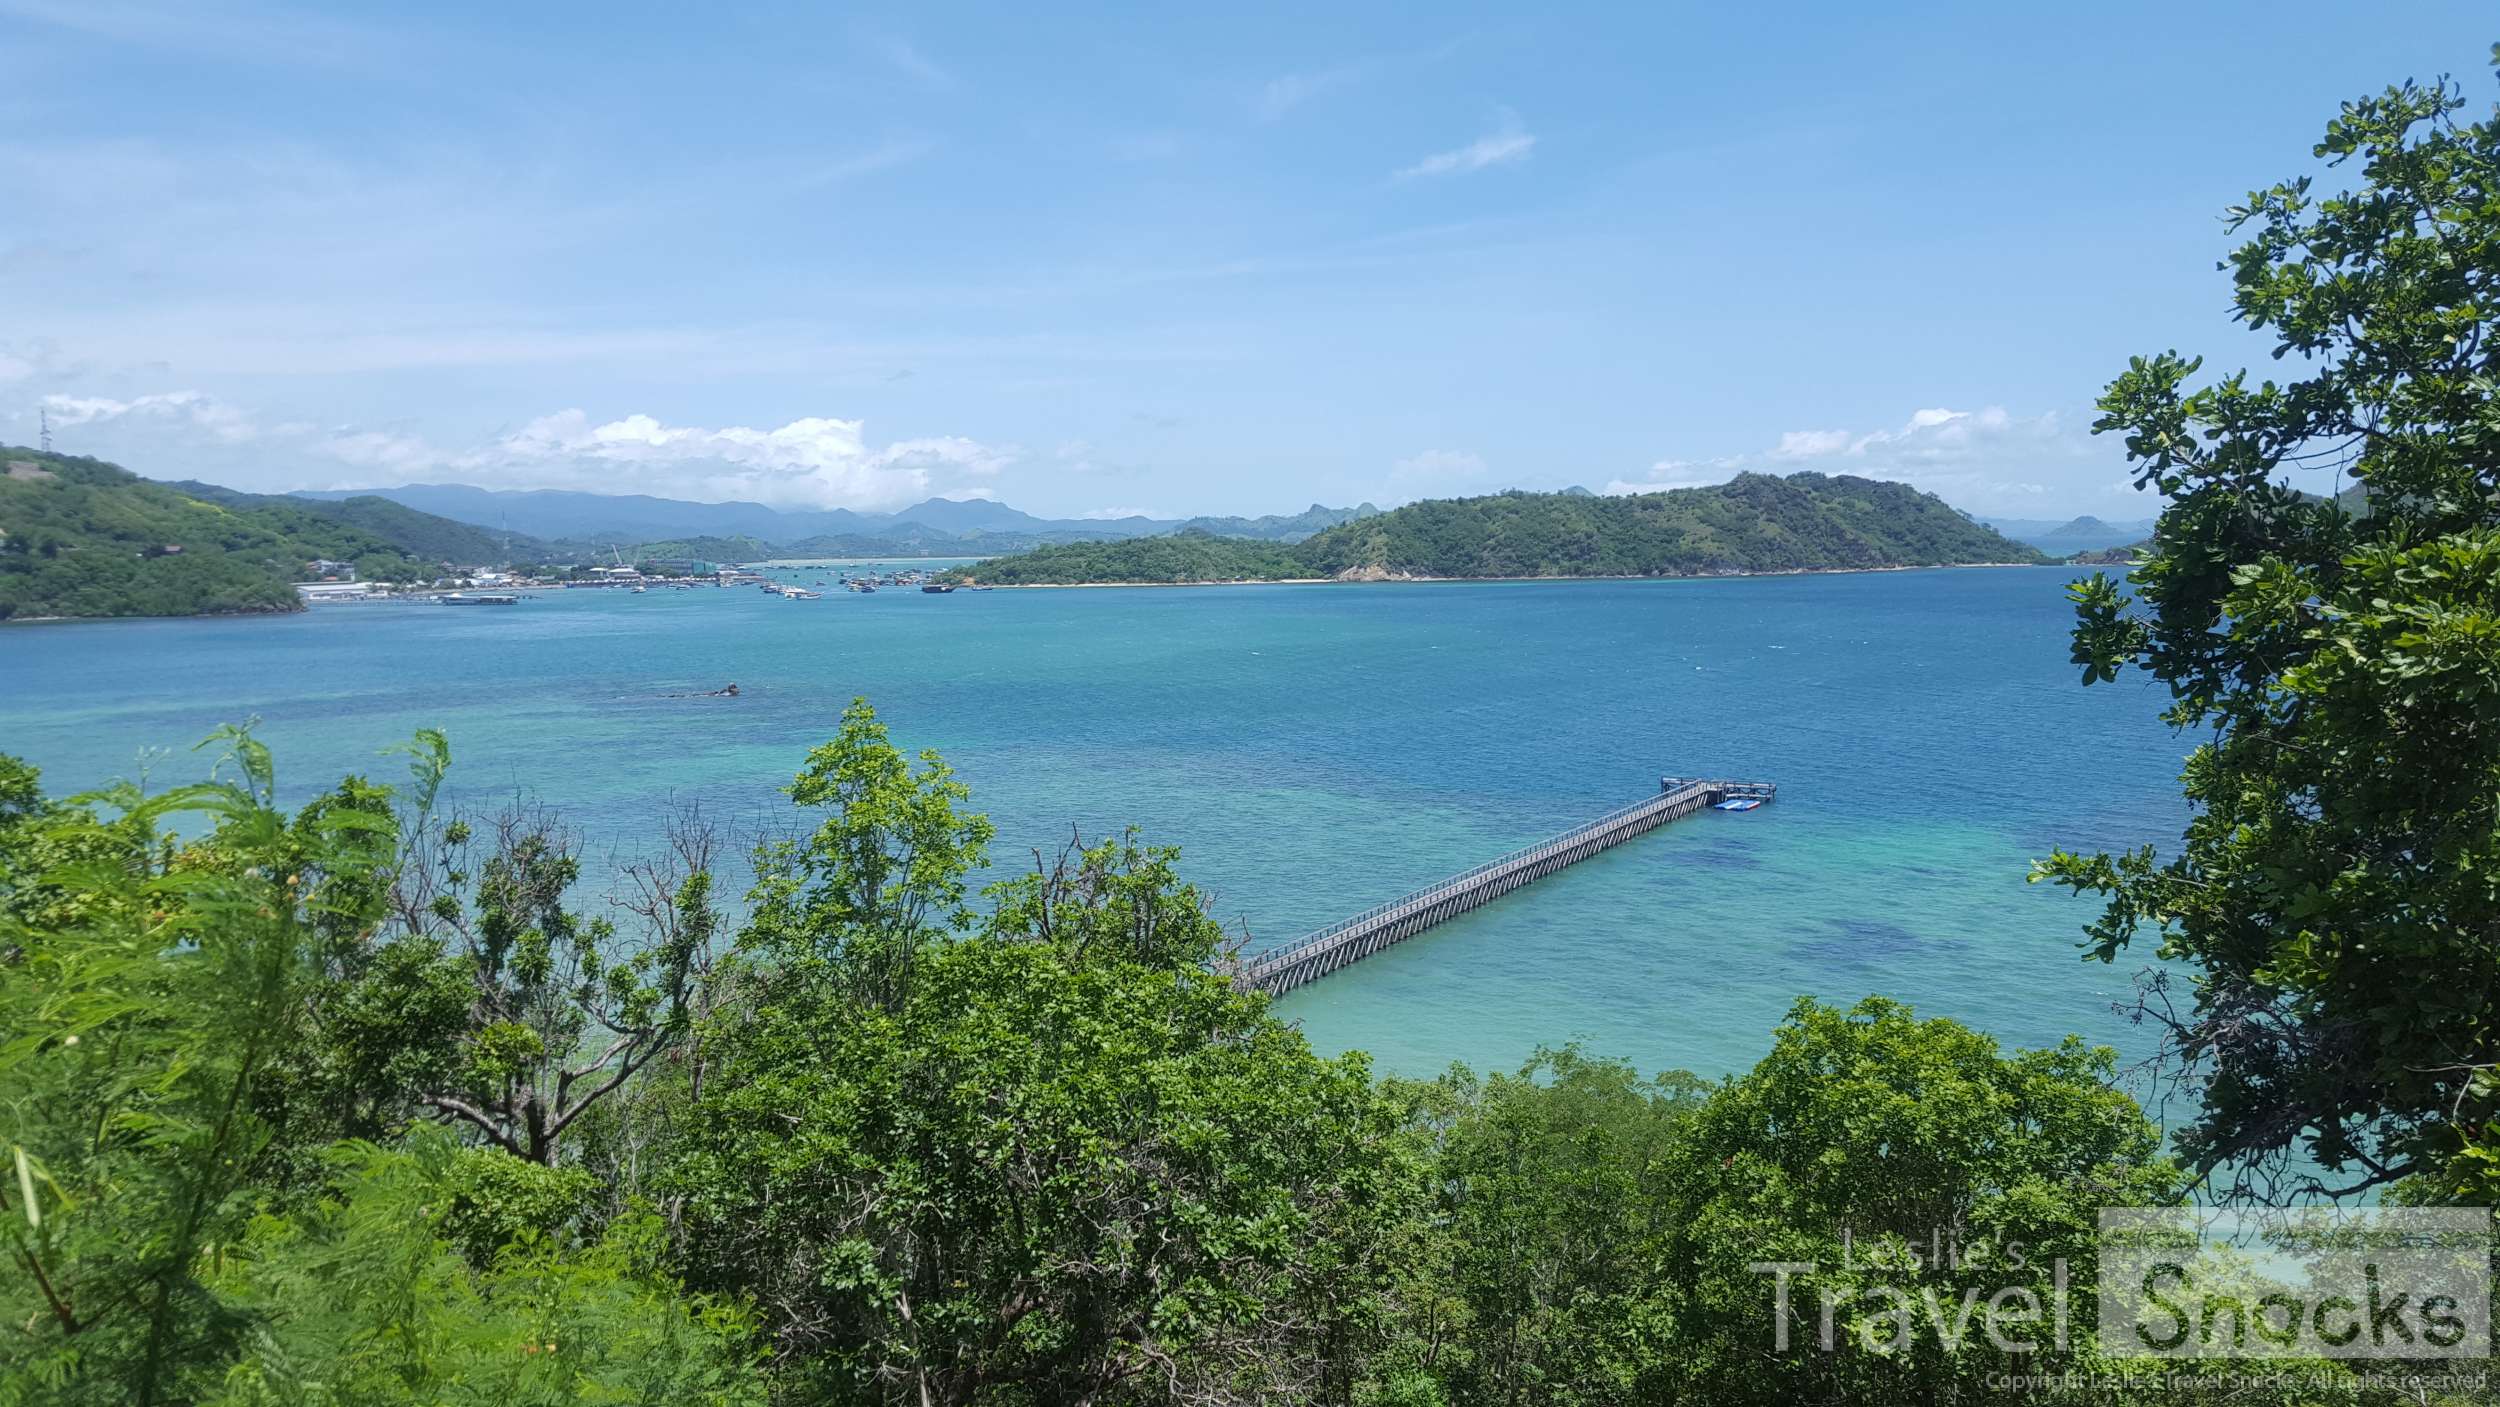 A view from near Wae Cicu beach looking over the turquoise sea at Labuan Bajo.